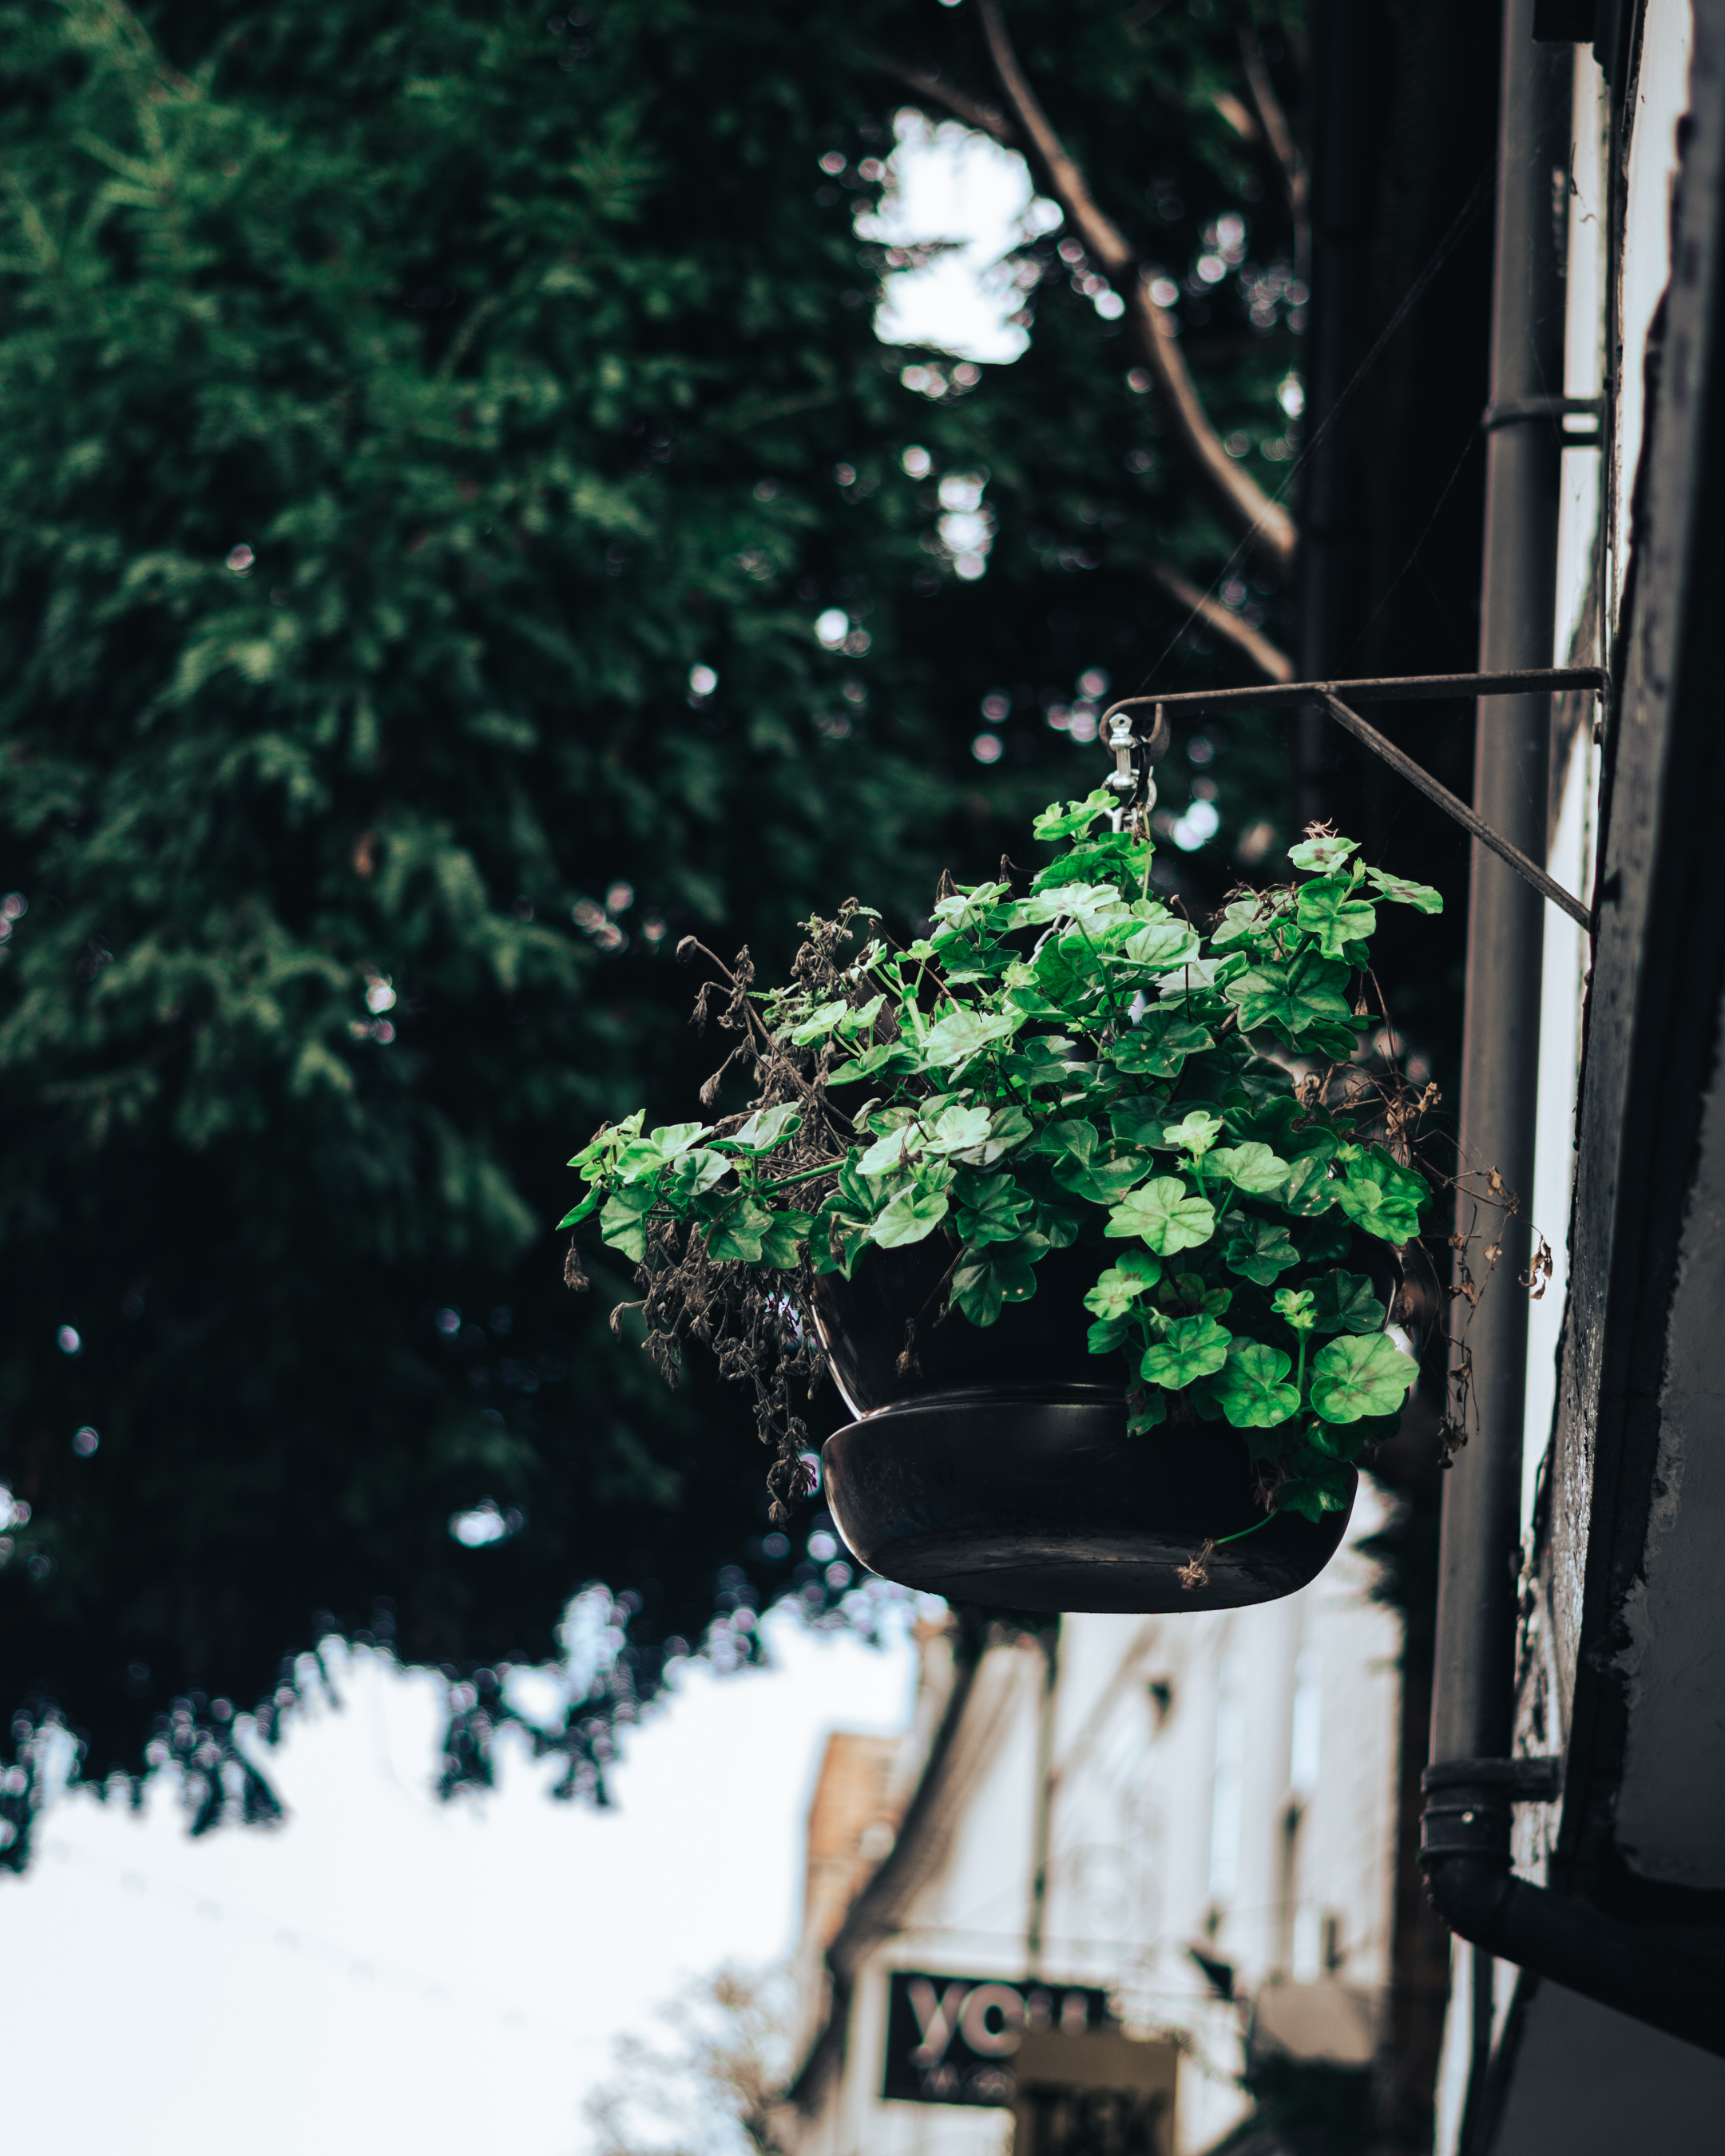 Photograph of a plant hanging in a pot from the side of a building.